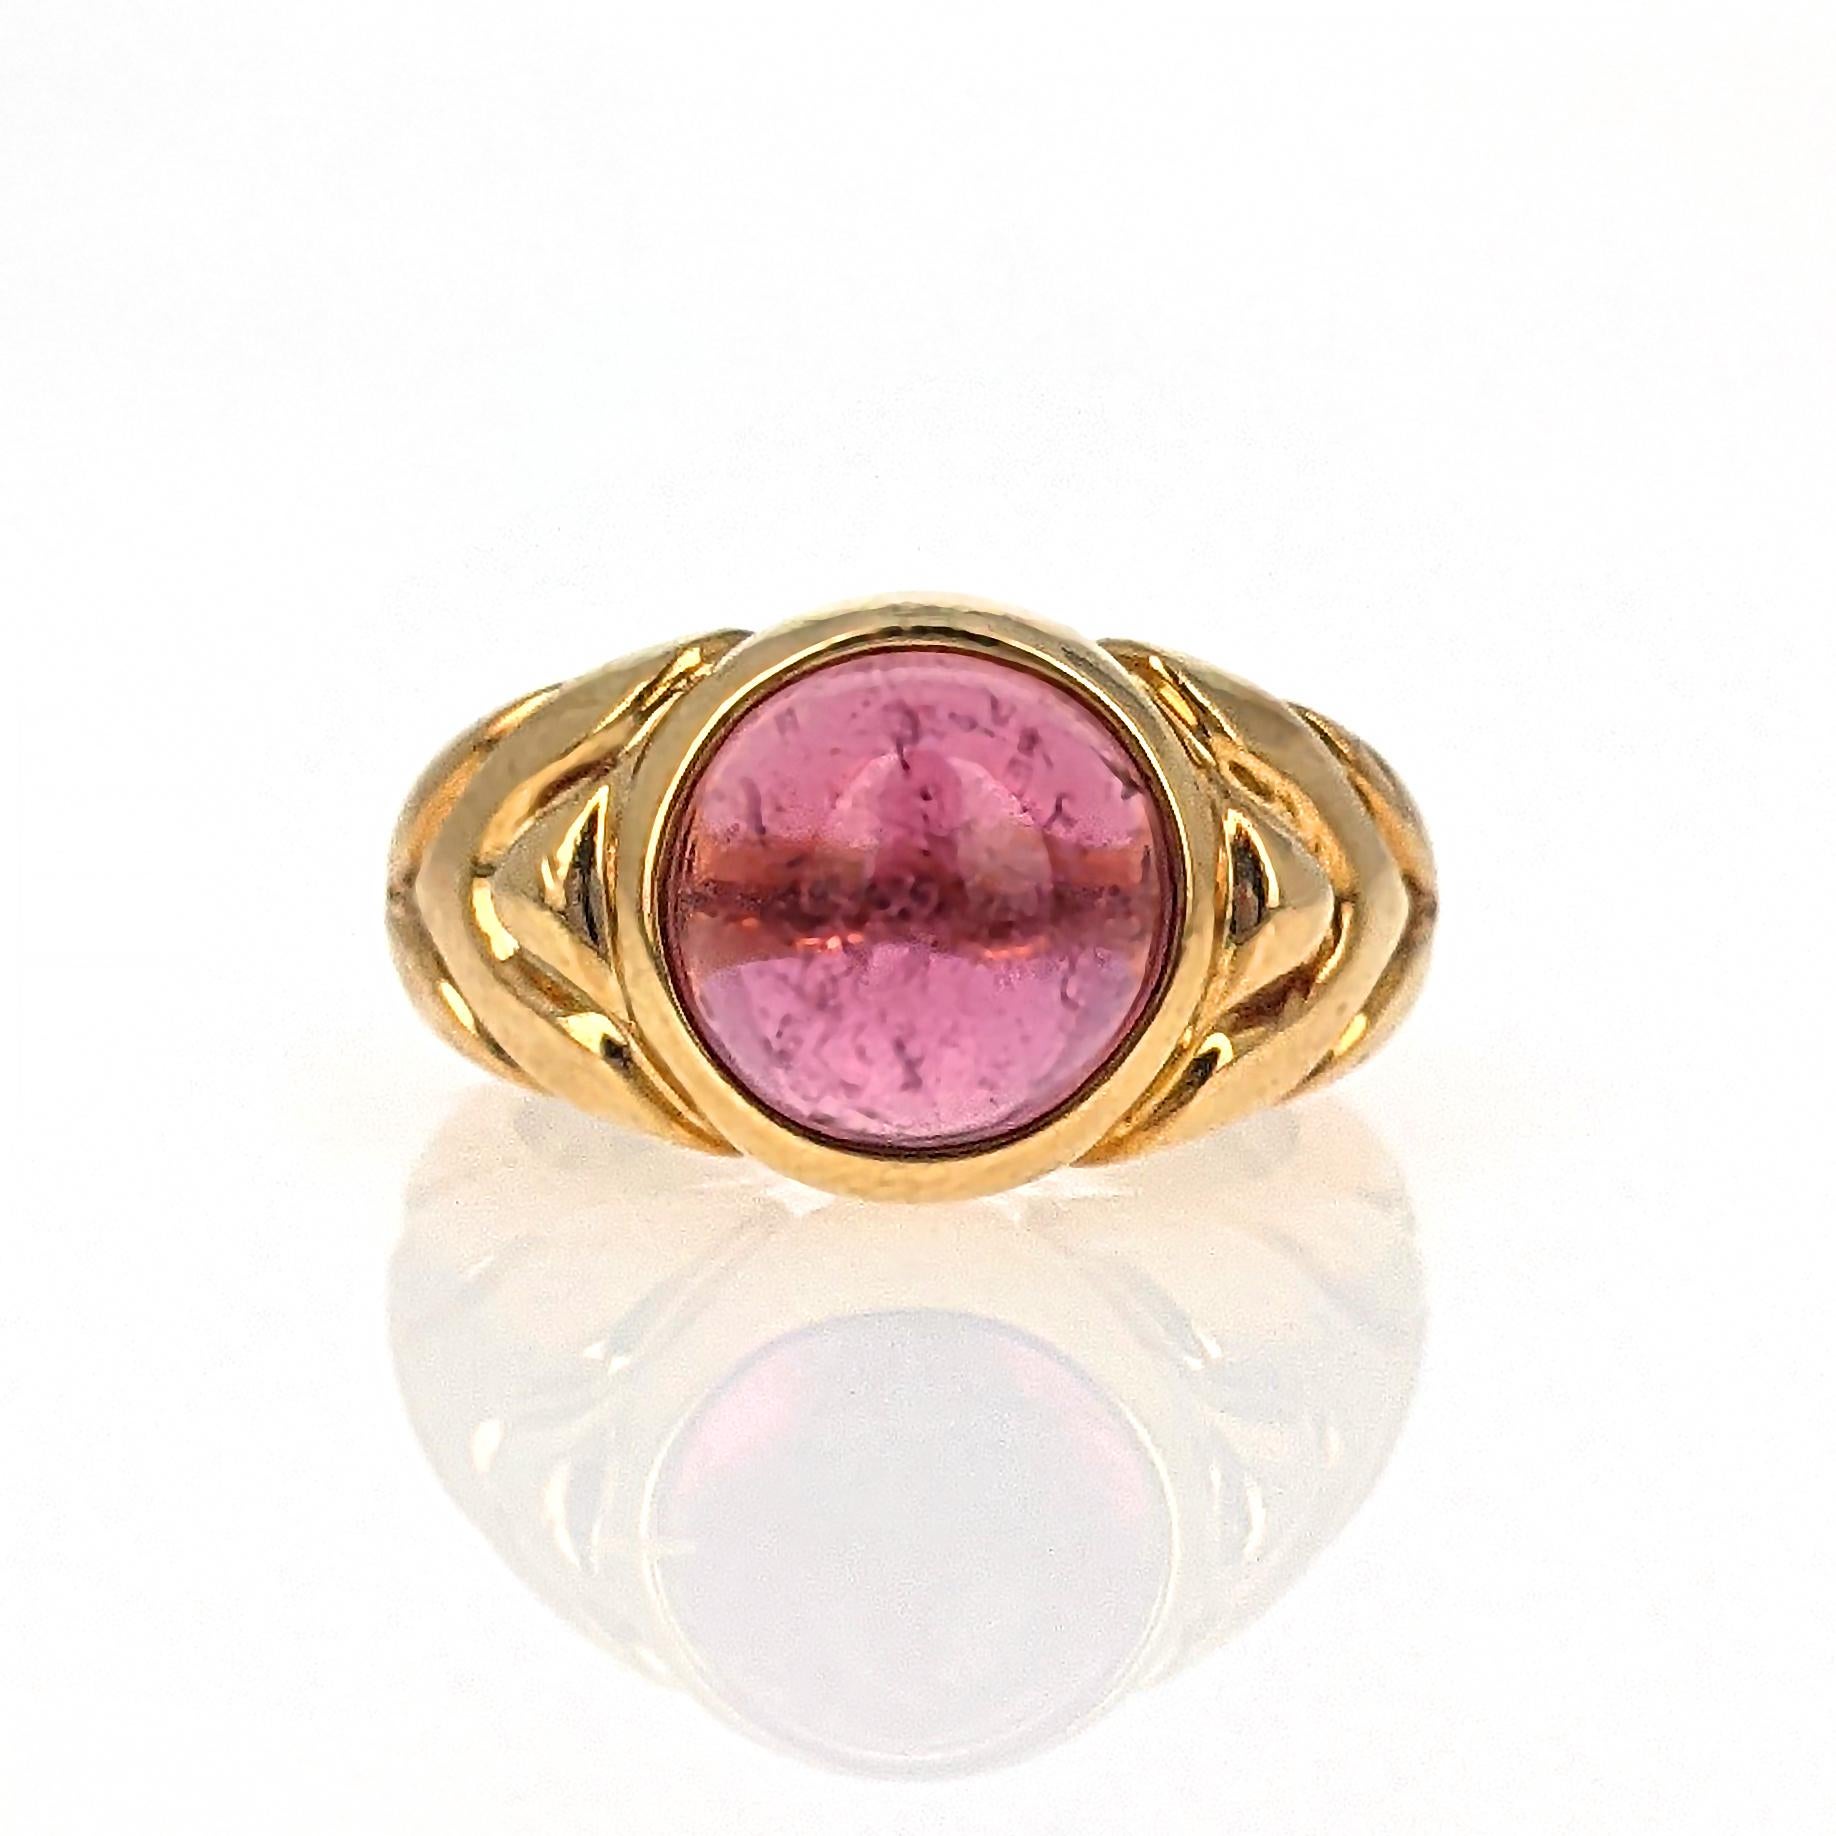 This Bulgari ring centers upon a cabochon pink tourmaline and accented by chevron detailing on the side, mounted in 18 karat yellow gold. It is signed with Italian assay mark. Size 4.75

With original box.